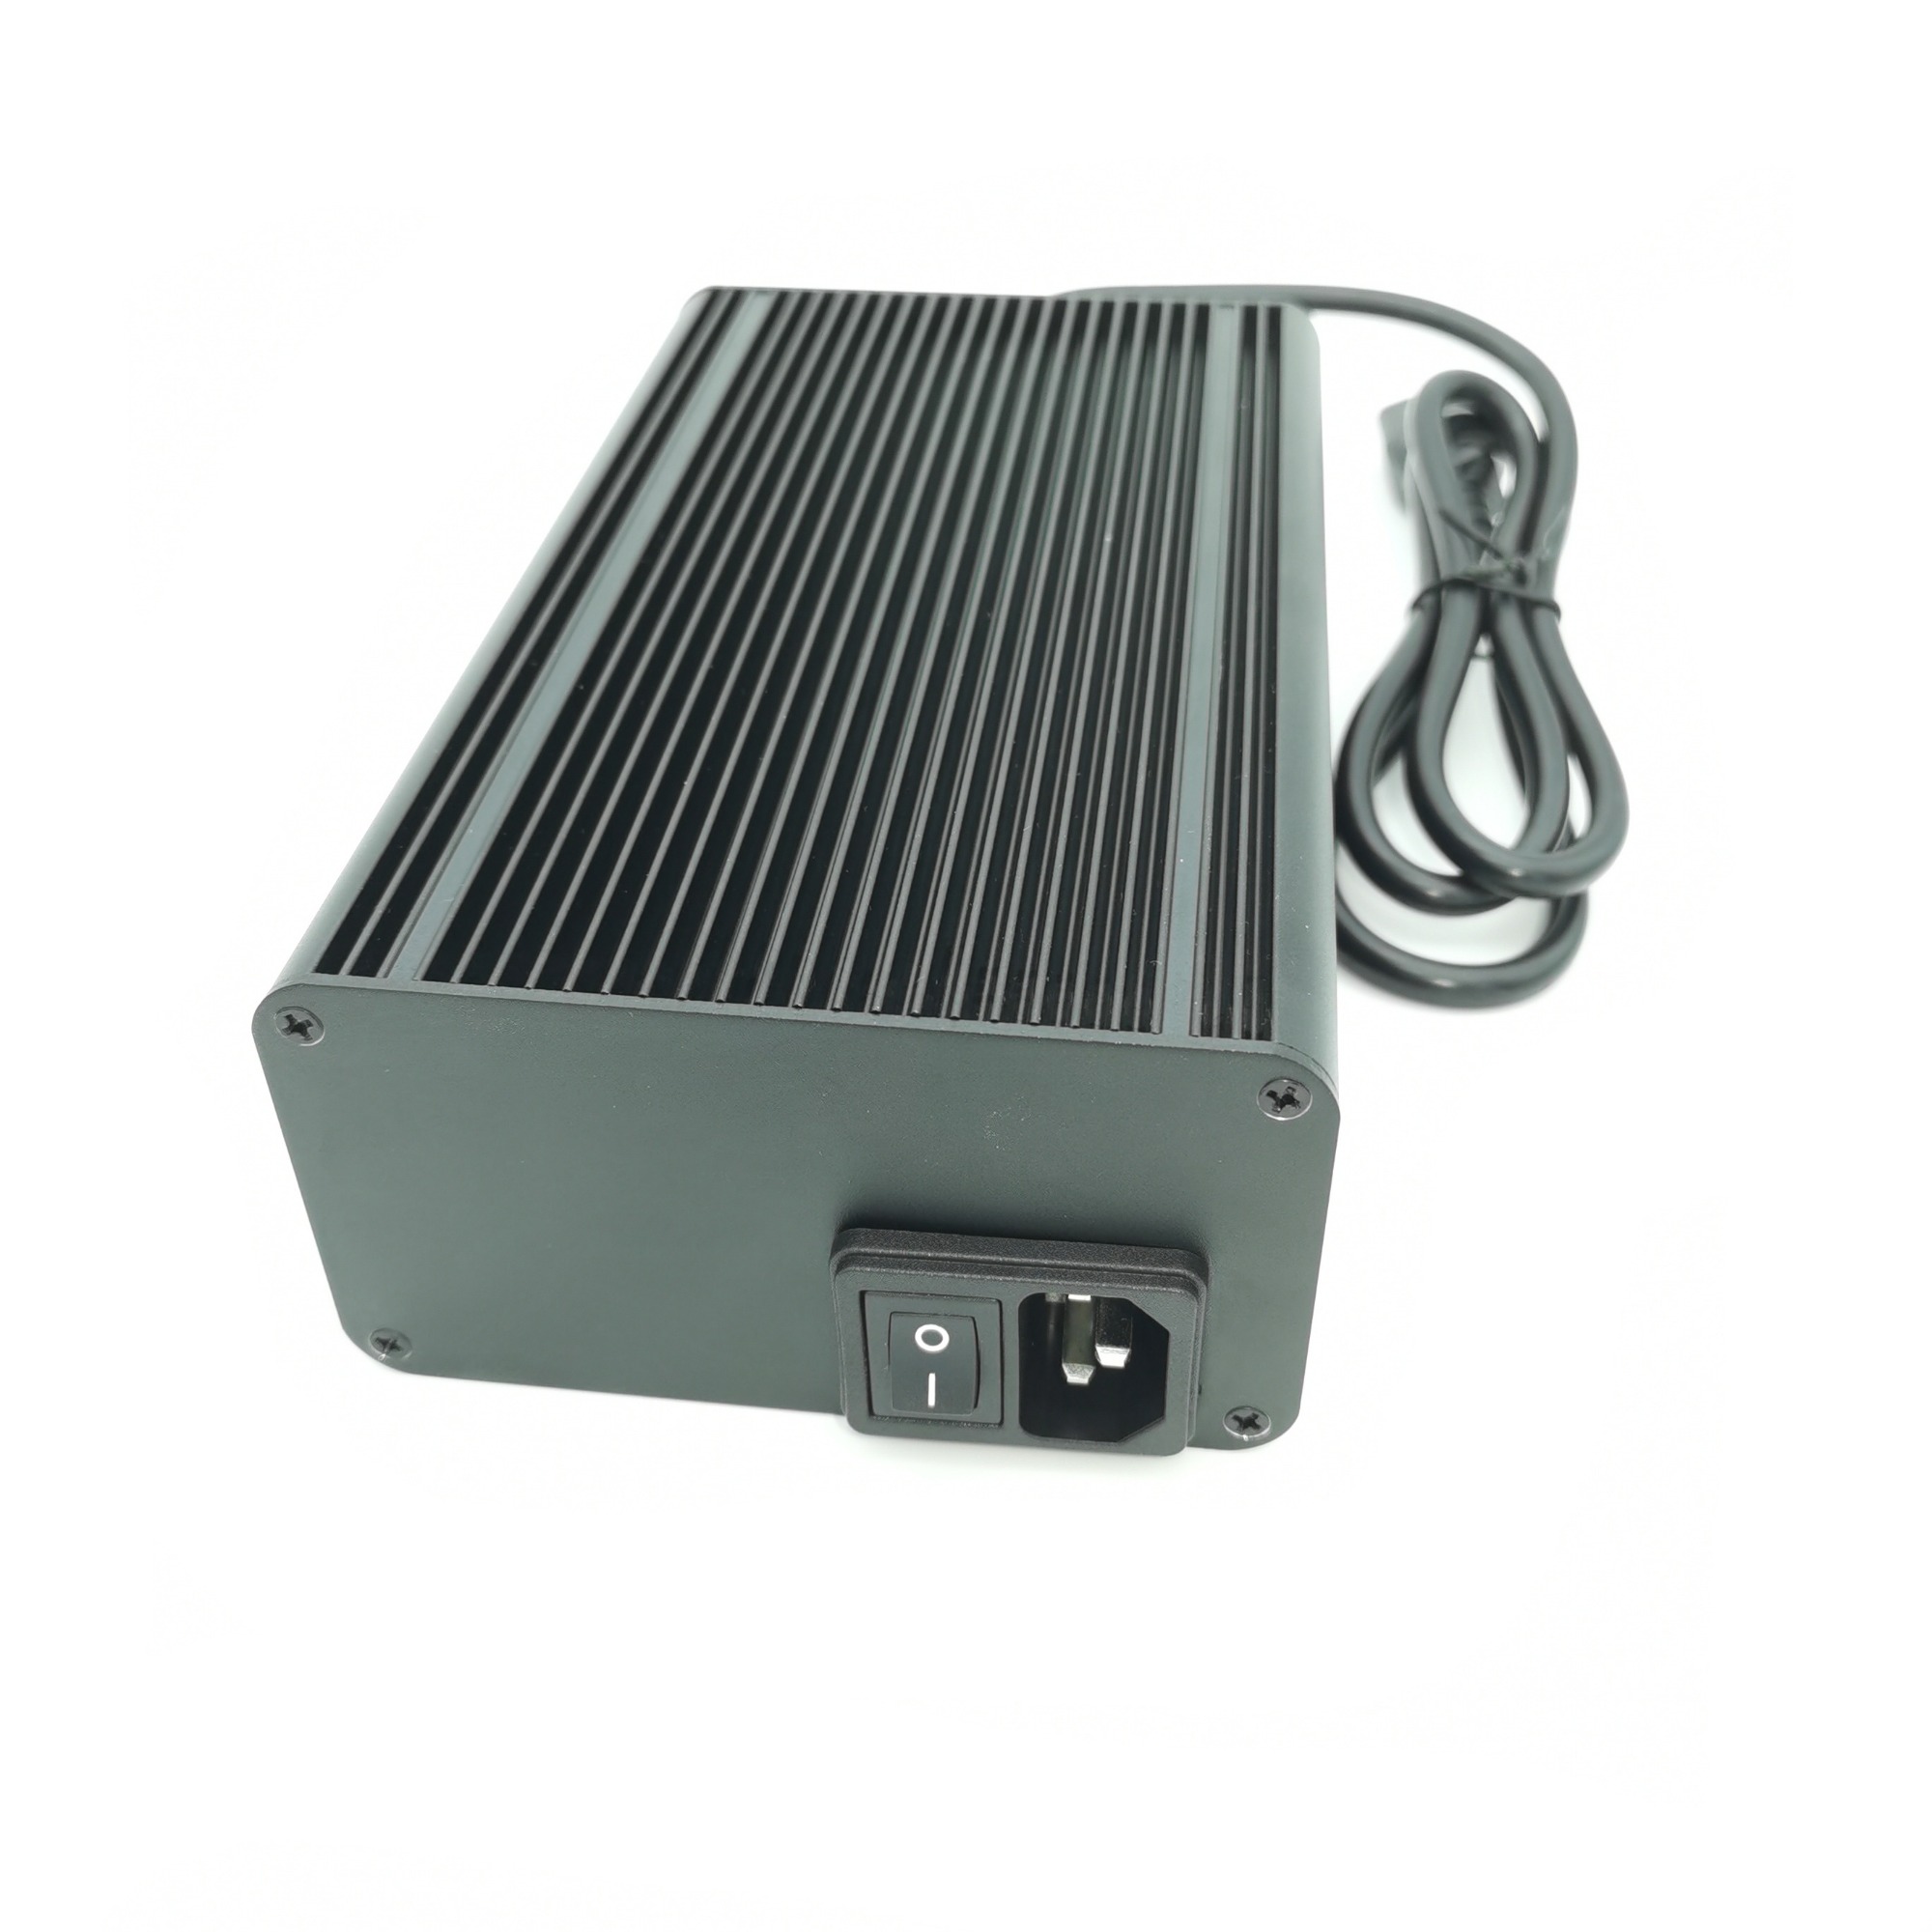 Smart 25.2V 10A lithium Battery Charger Dustproof type for 6S Li-ion battery charging